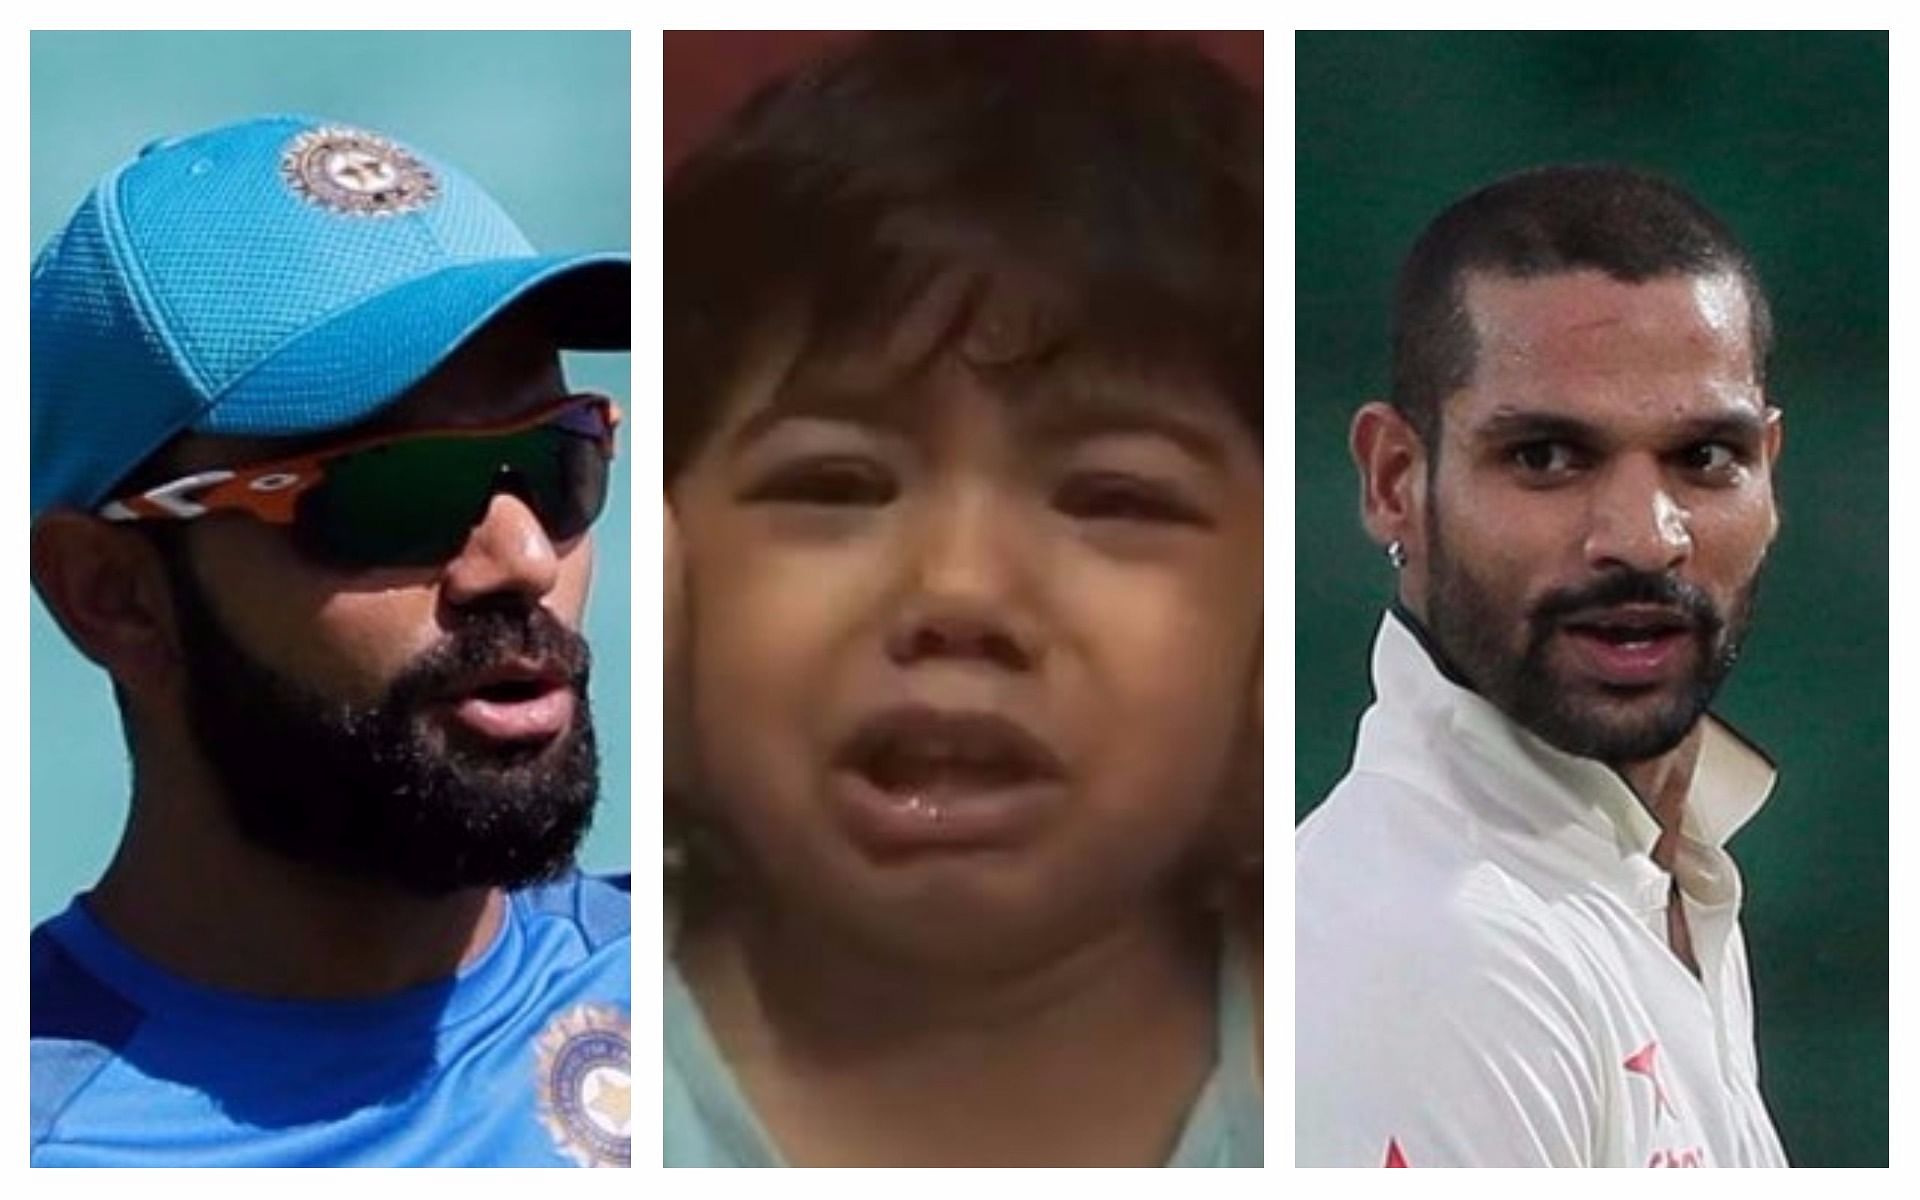 Kohli and Dhawan share video of child being scolded and slapped by parent.&nbsp;